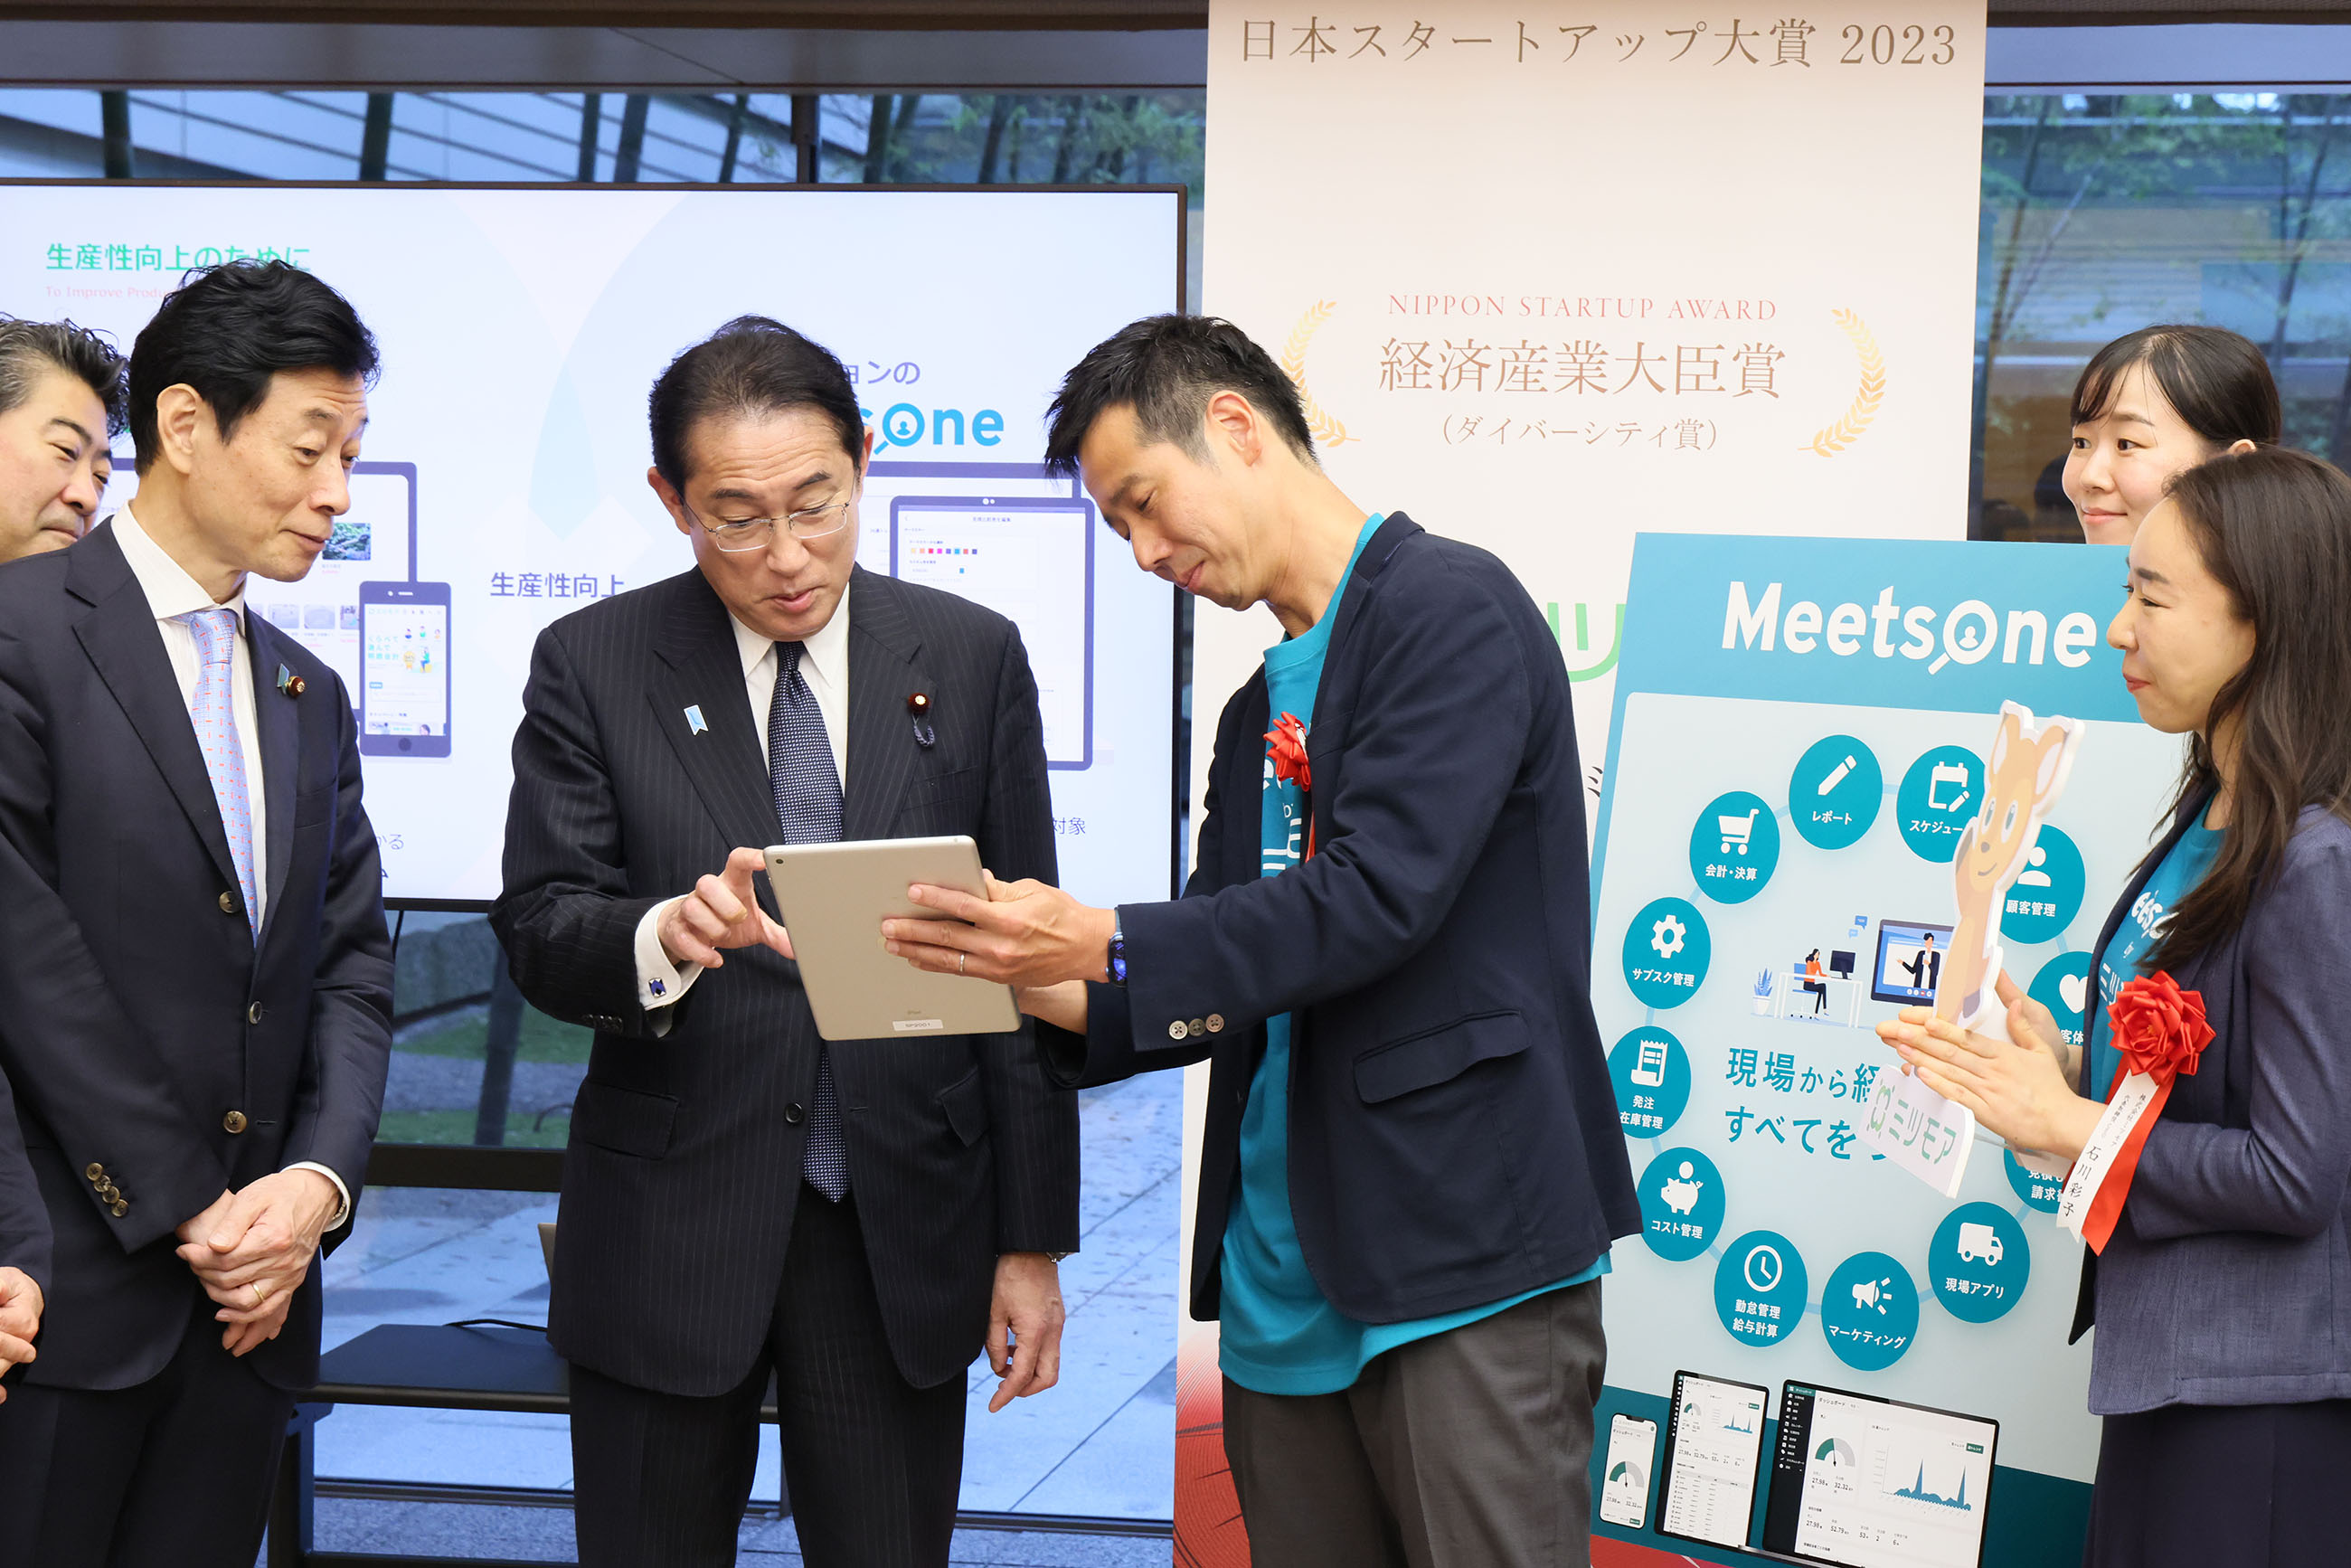 Prime Minister Kishida viewing the exhibition booth of award winners (2)